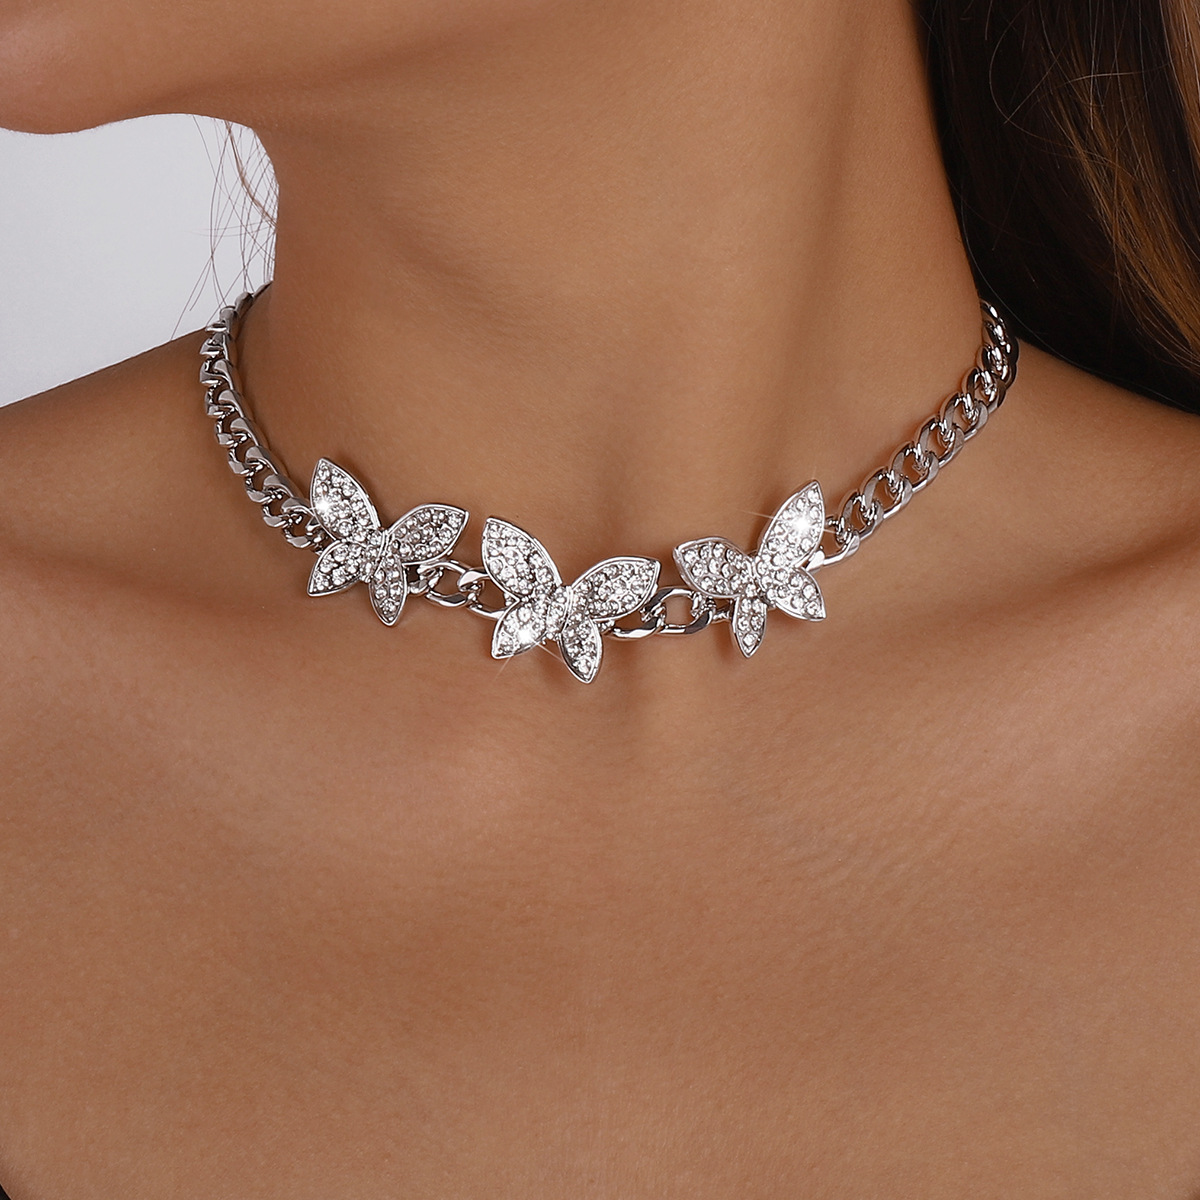 Collar Chain Gold Silver butterfly CRRshop free shipping female hot seller elegant diamond butterfly necklacehiphop women new fashional present the most beautiful birthday gift